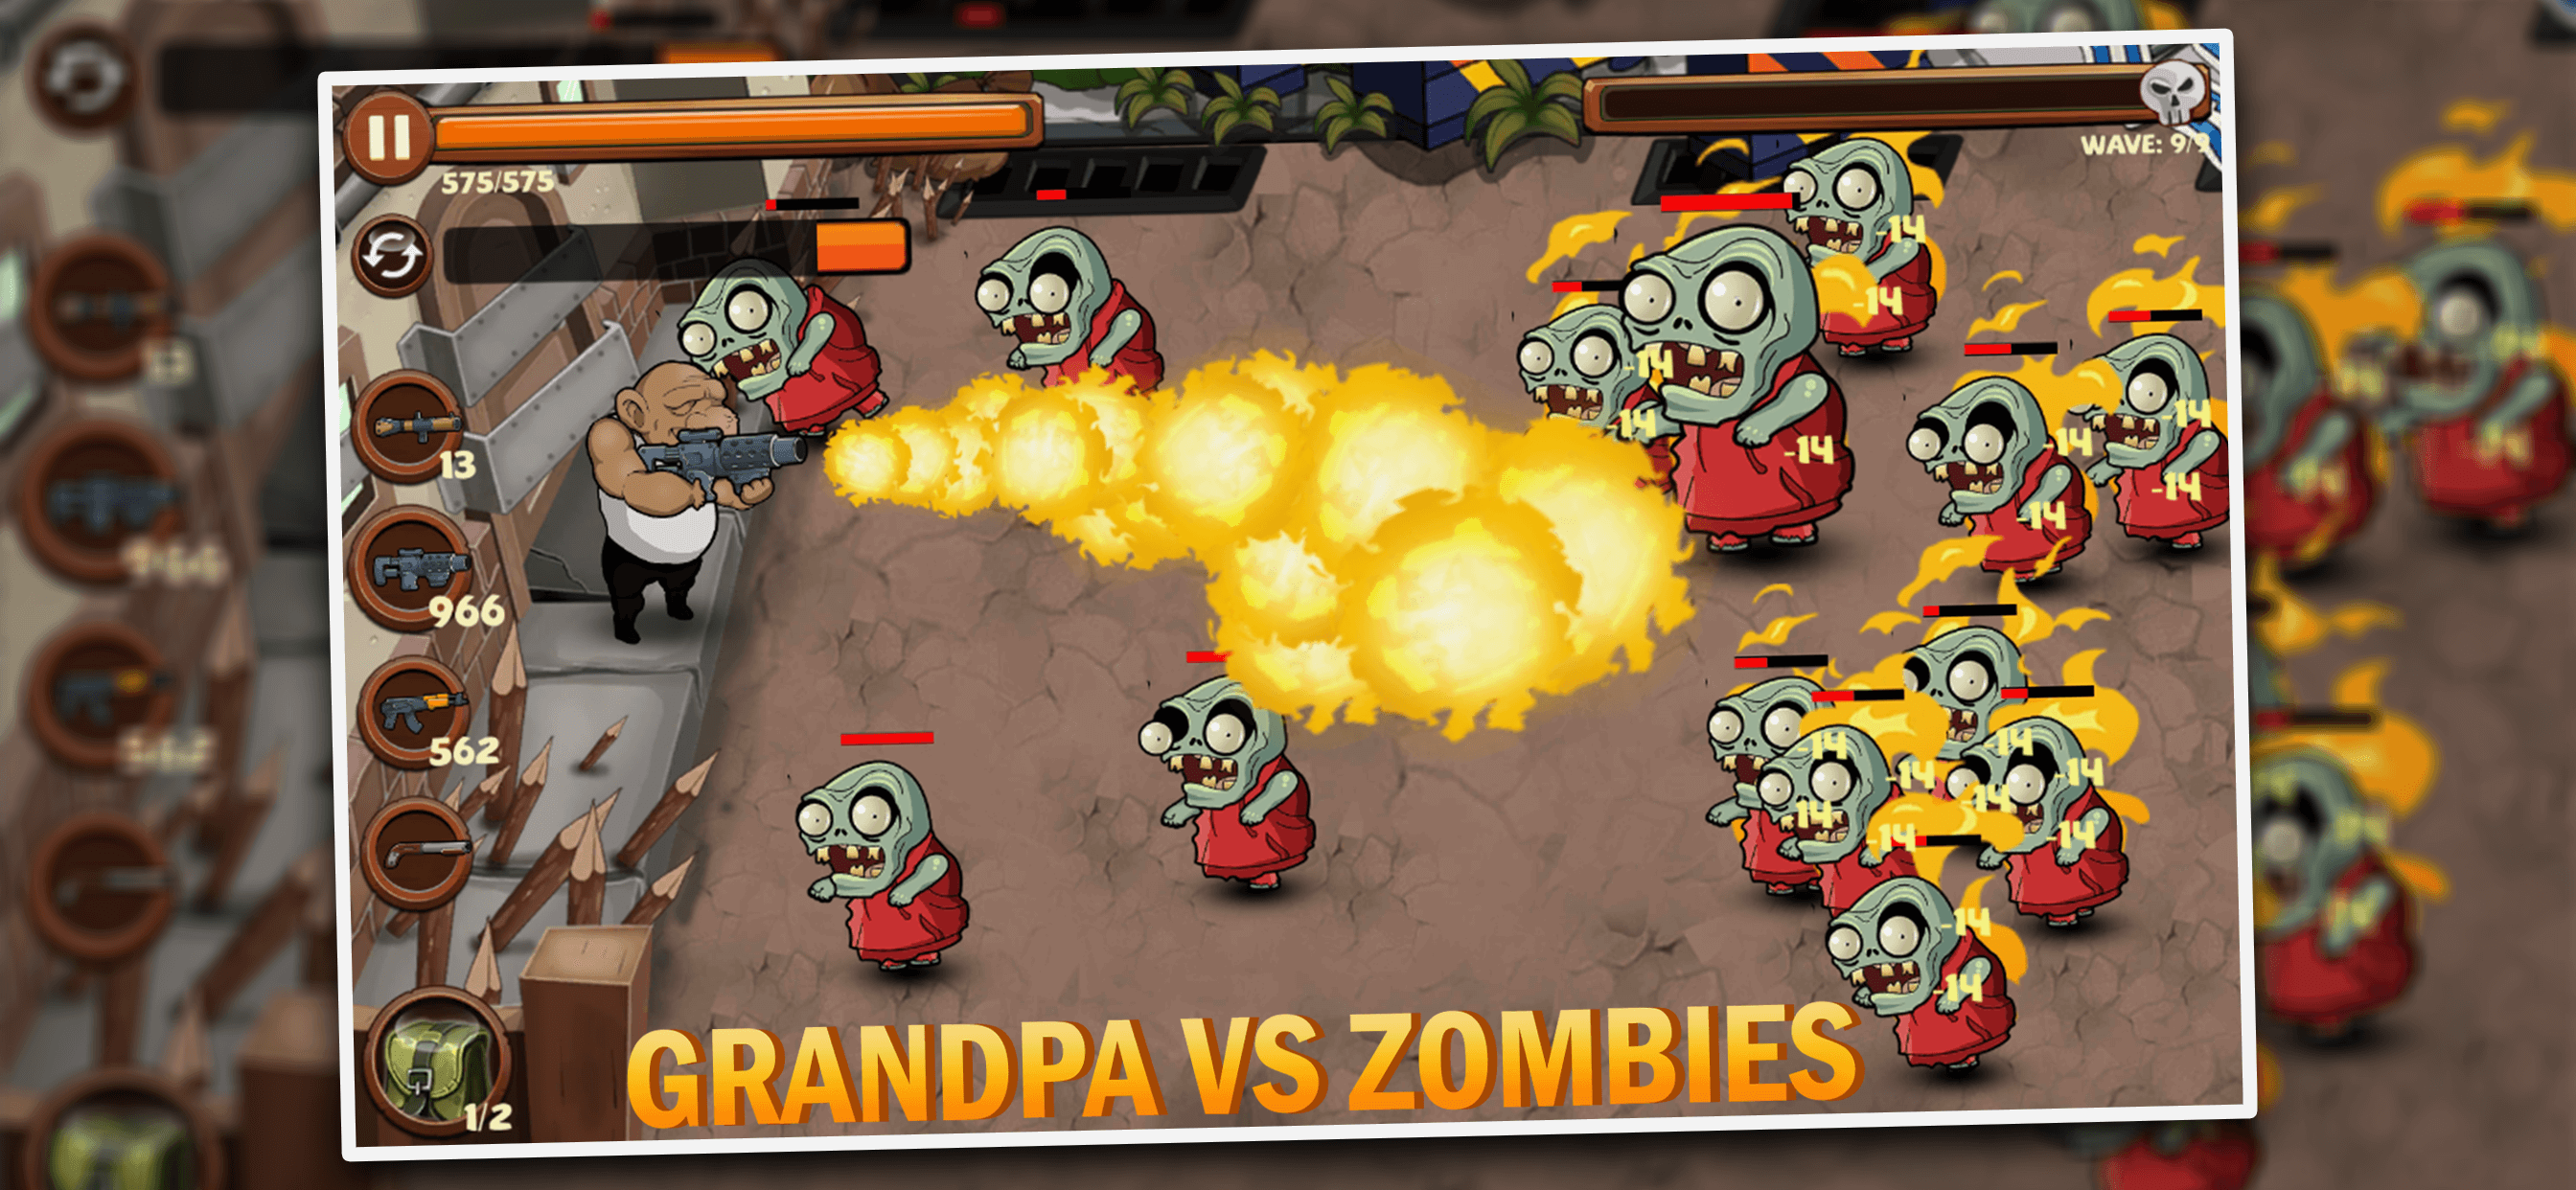 2D Zombie Age – Shooting Game